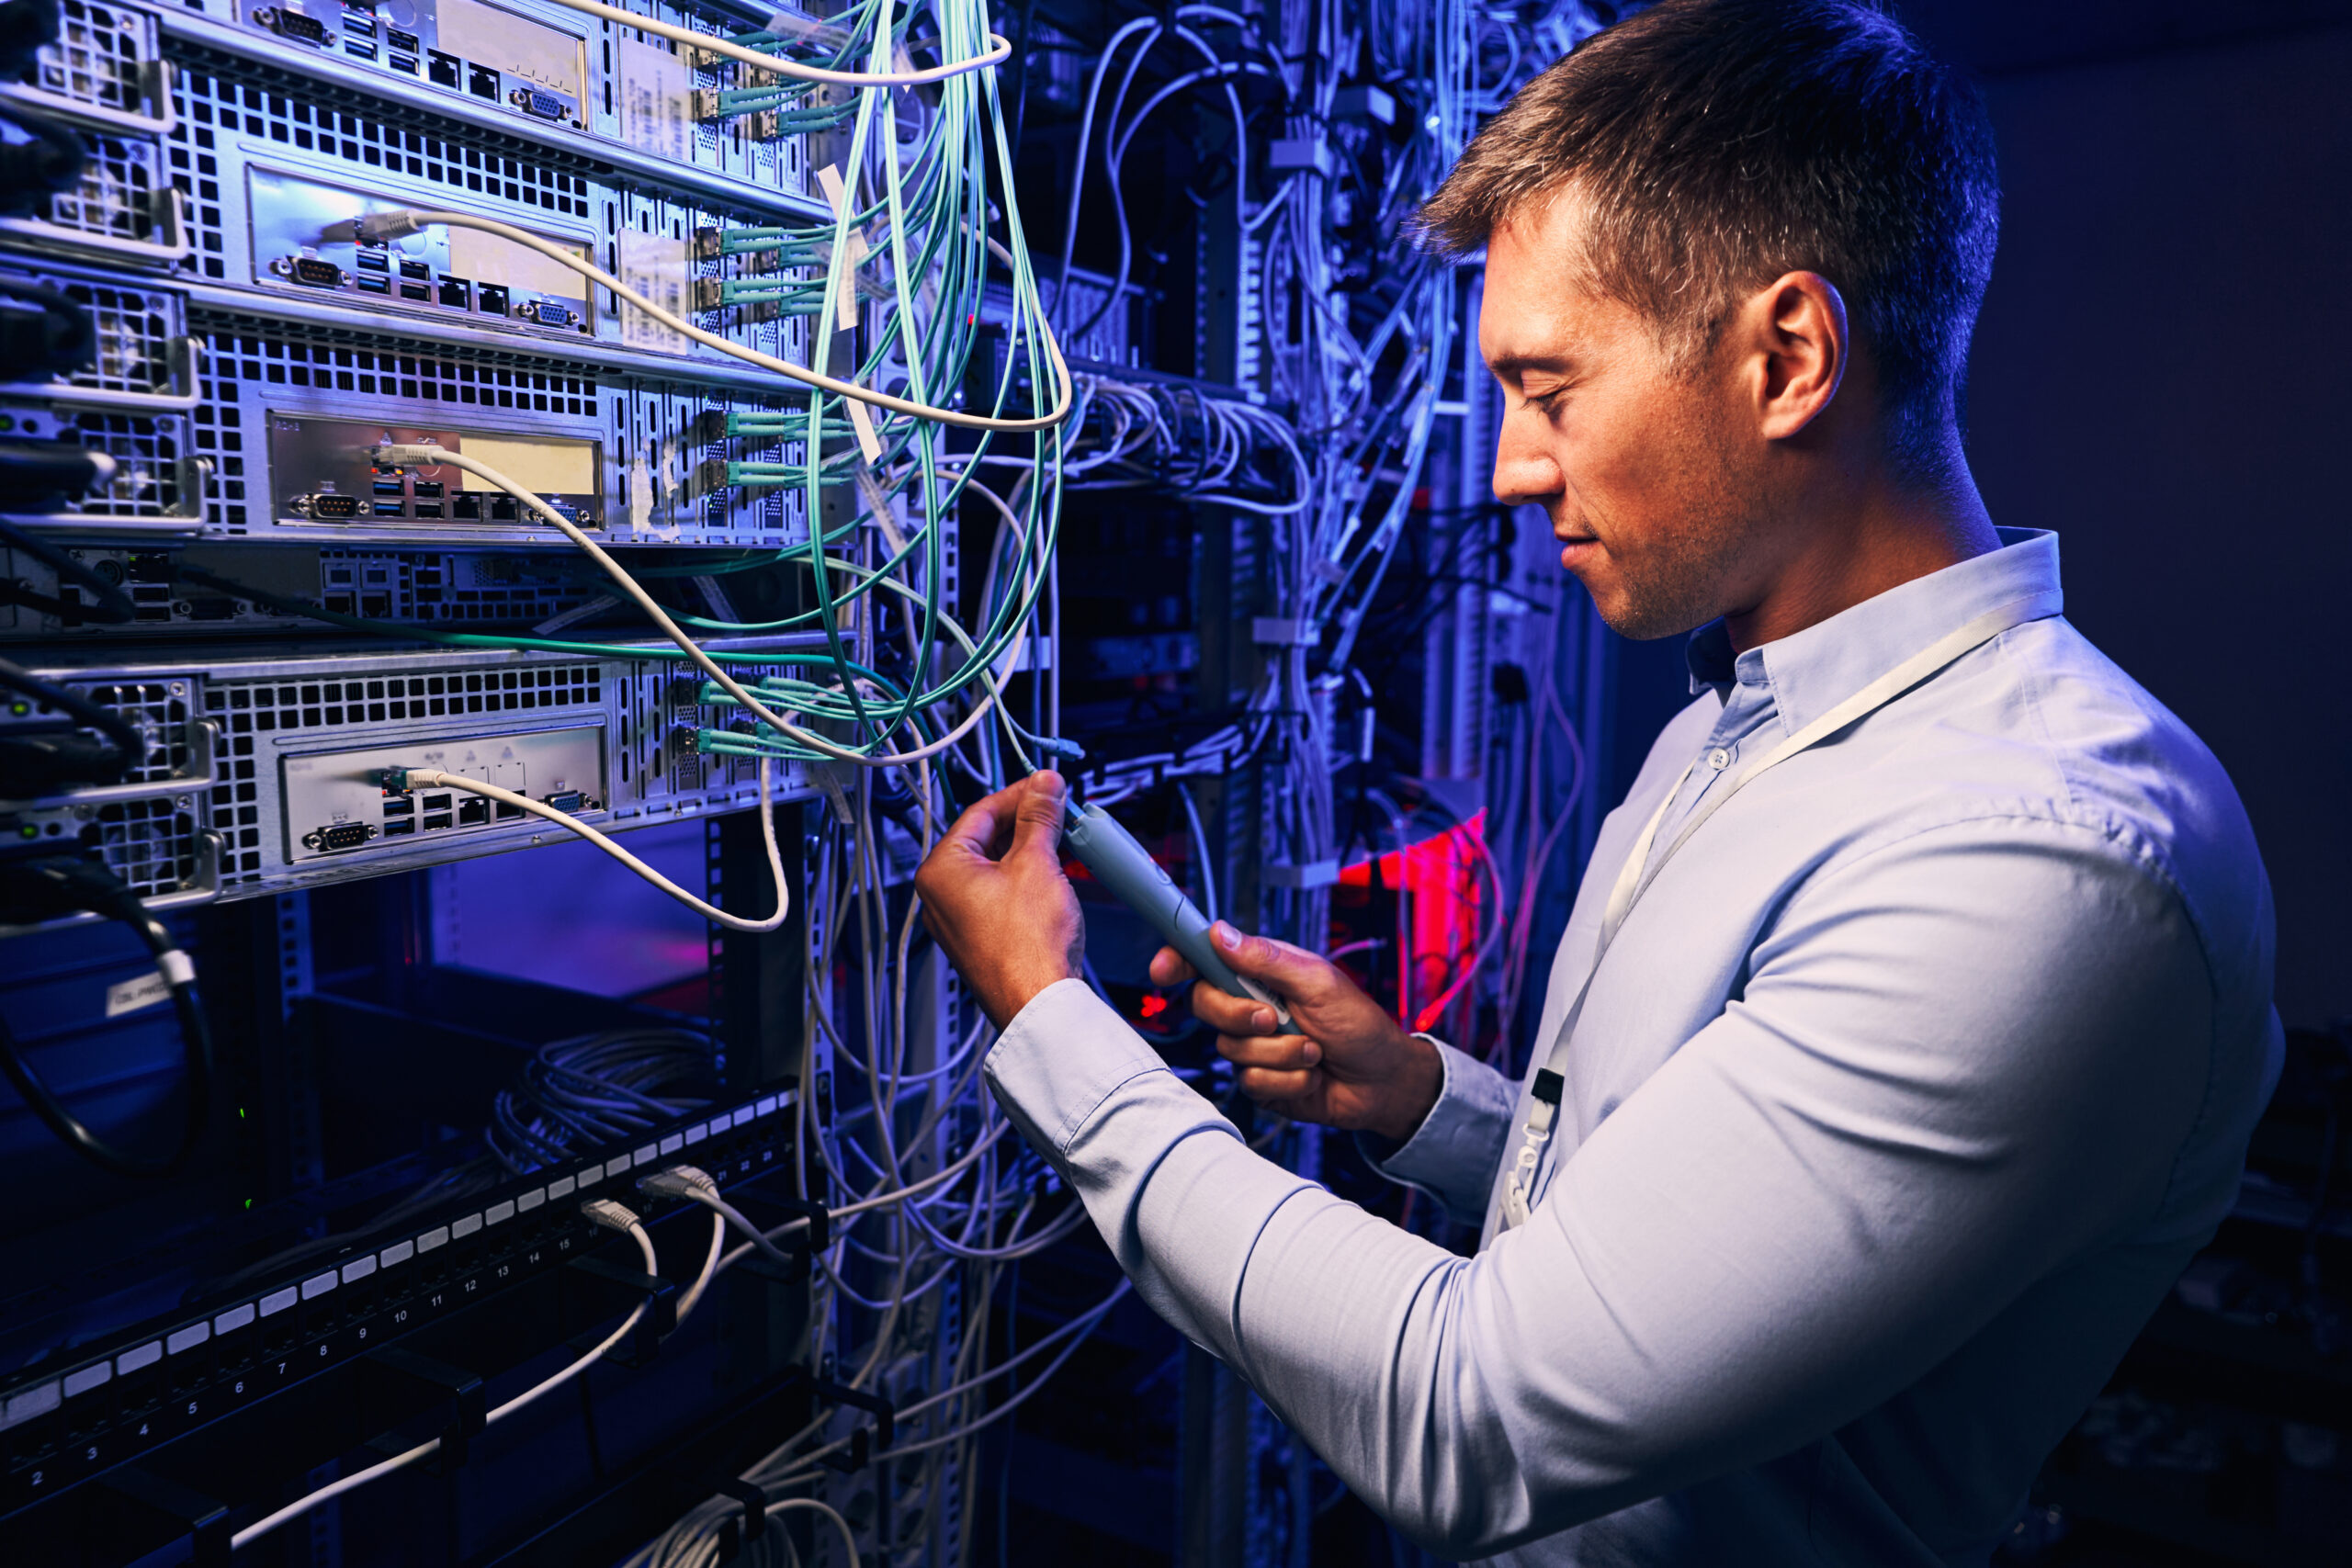 focused data center employee checking cabling infr 2021 10 20 21 27 49 utc scaled